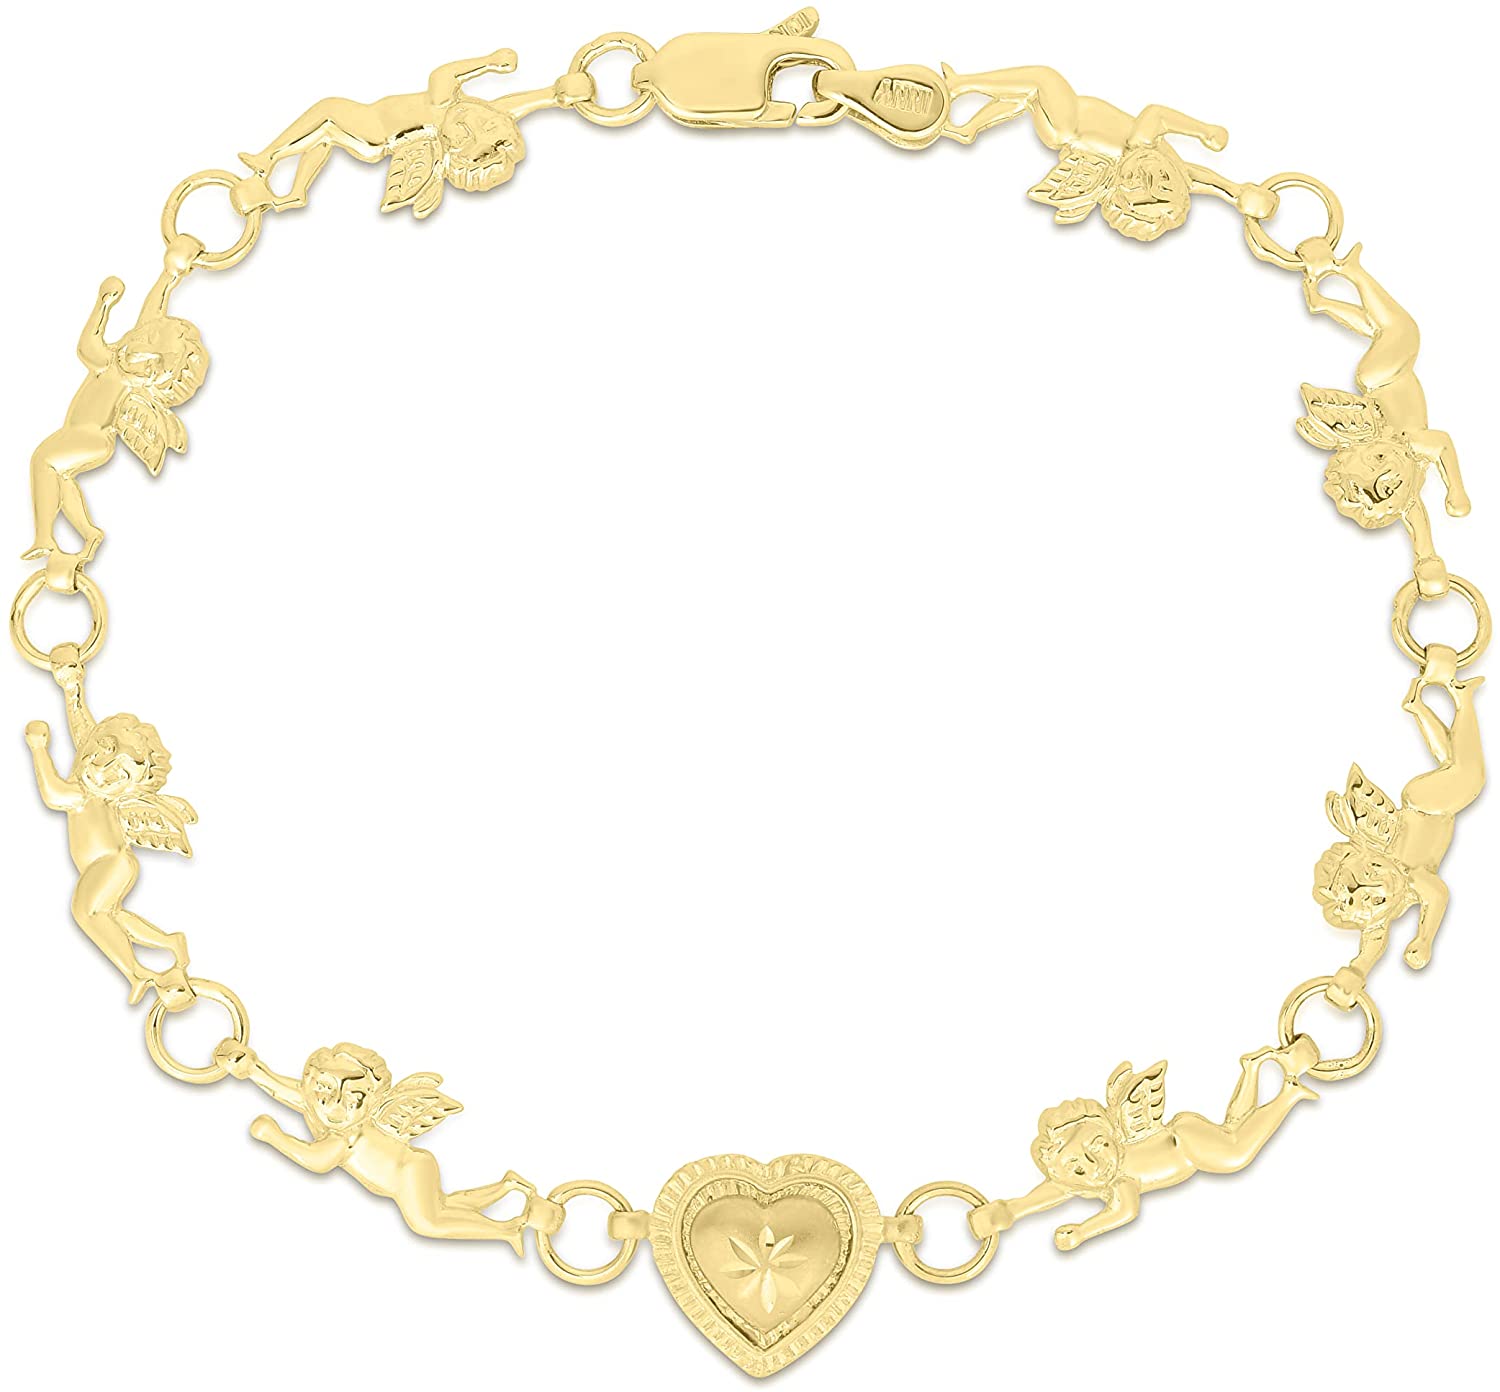 10k Yellow Gold Flying Baby Angel with Heart Charm Link Bracelet